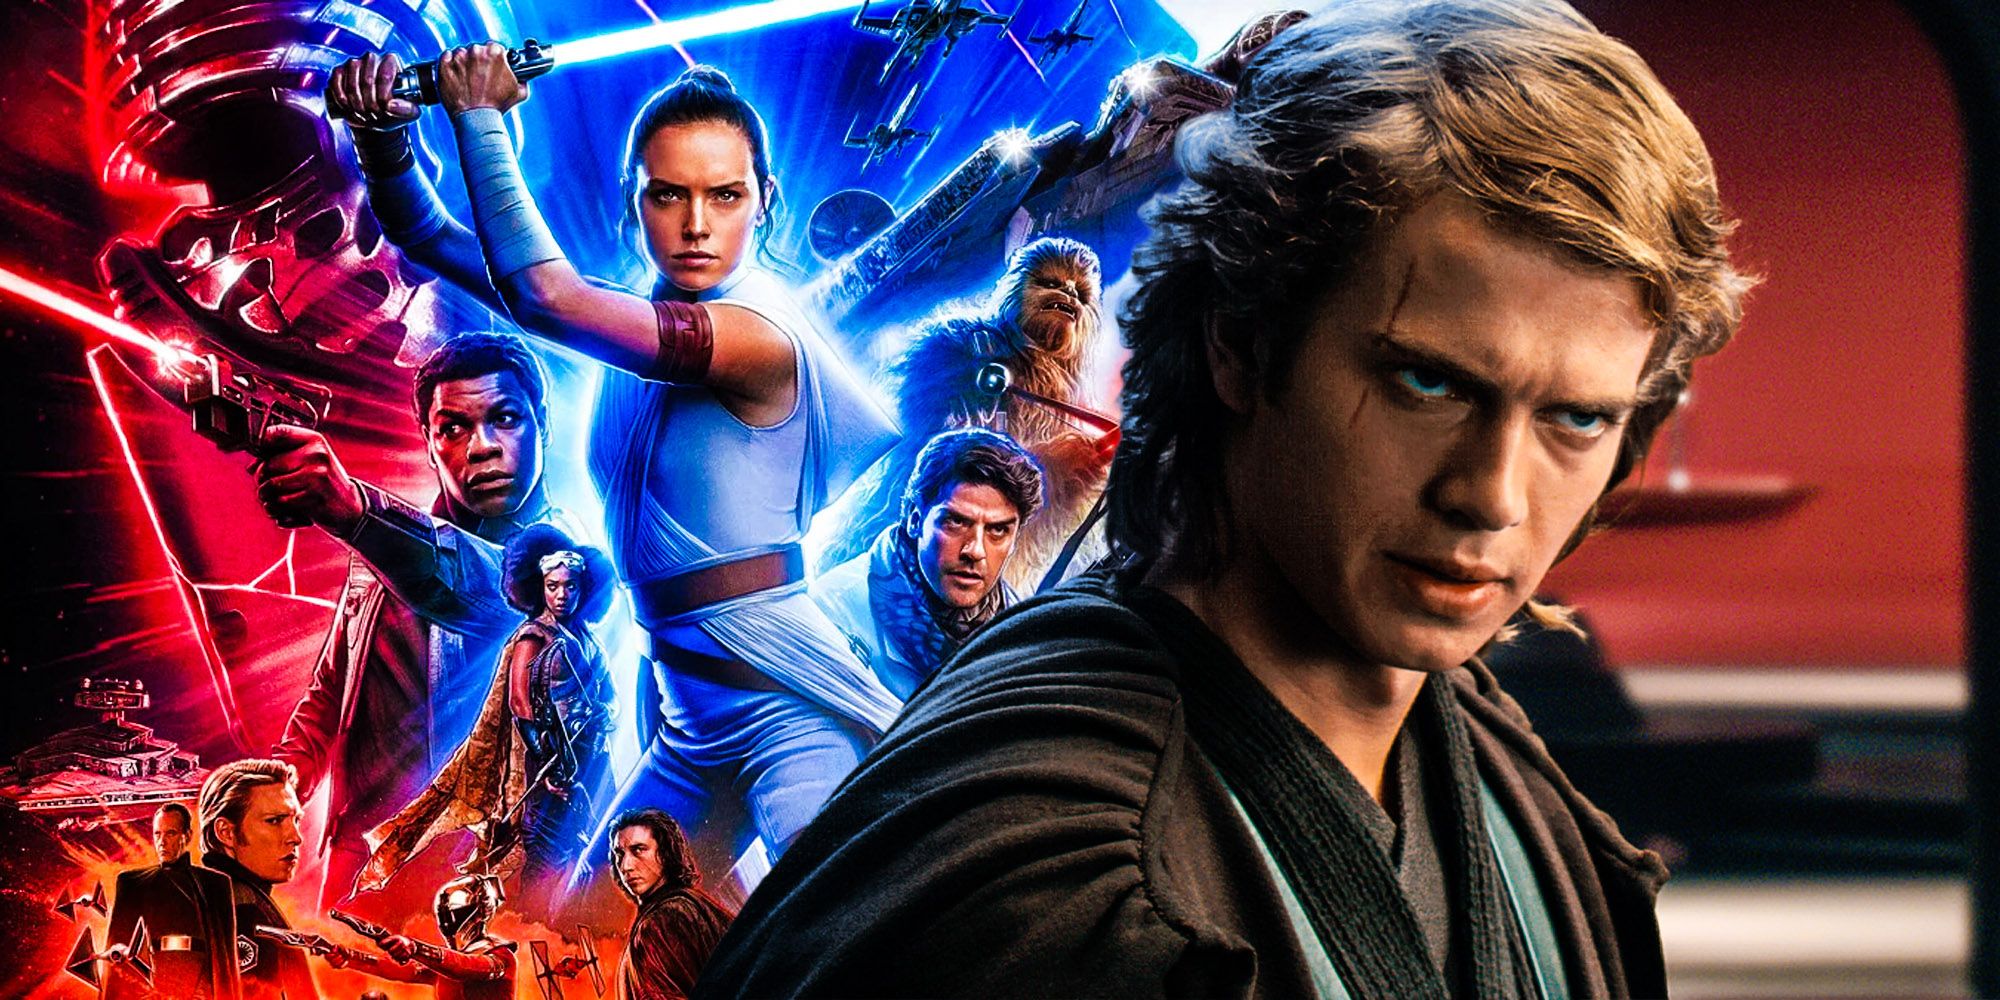 Anakin Skywalker in Revenge of the Sith and The Rise of Skywalker poster.